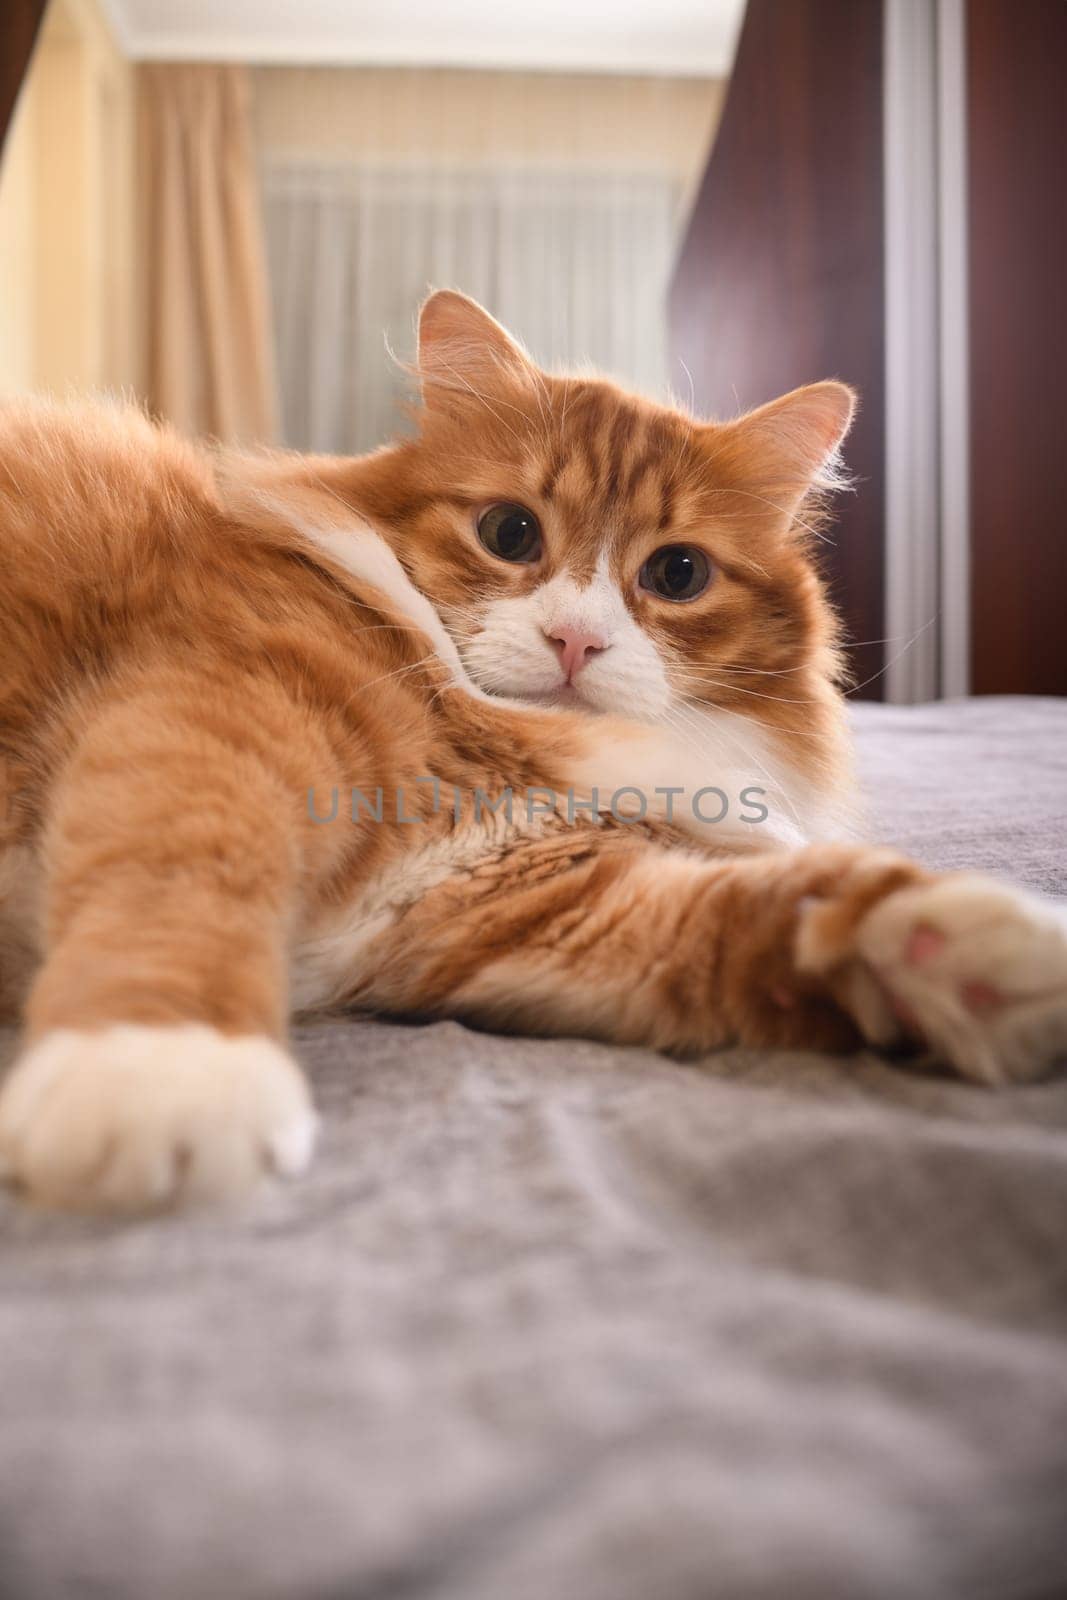 The ginger cat is resting, lounging on the bed. Close-up.